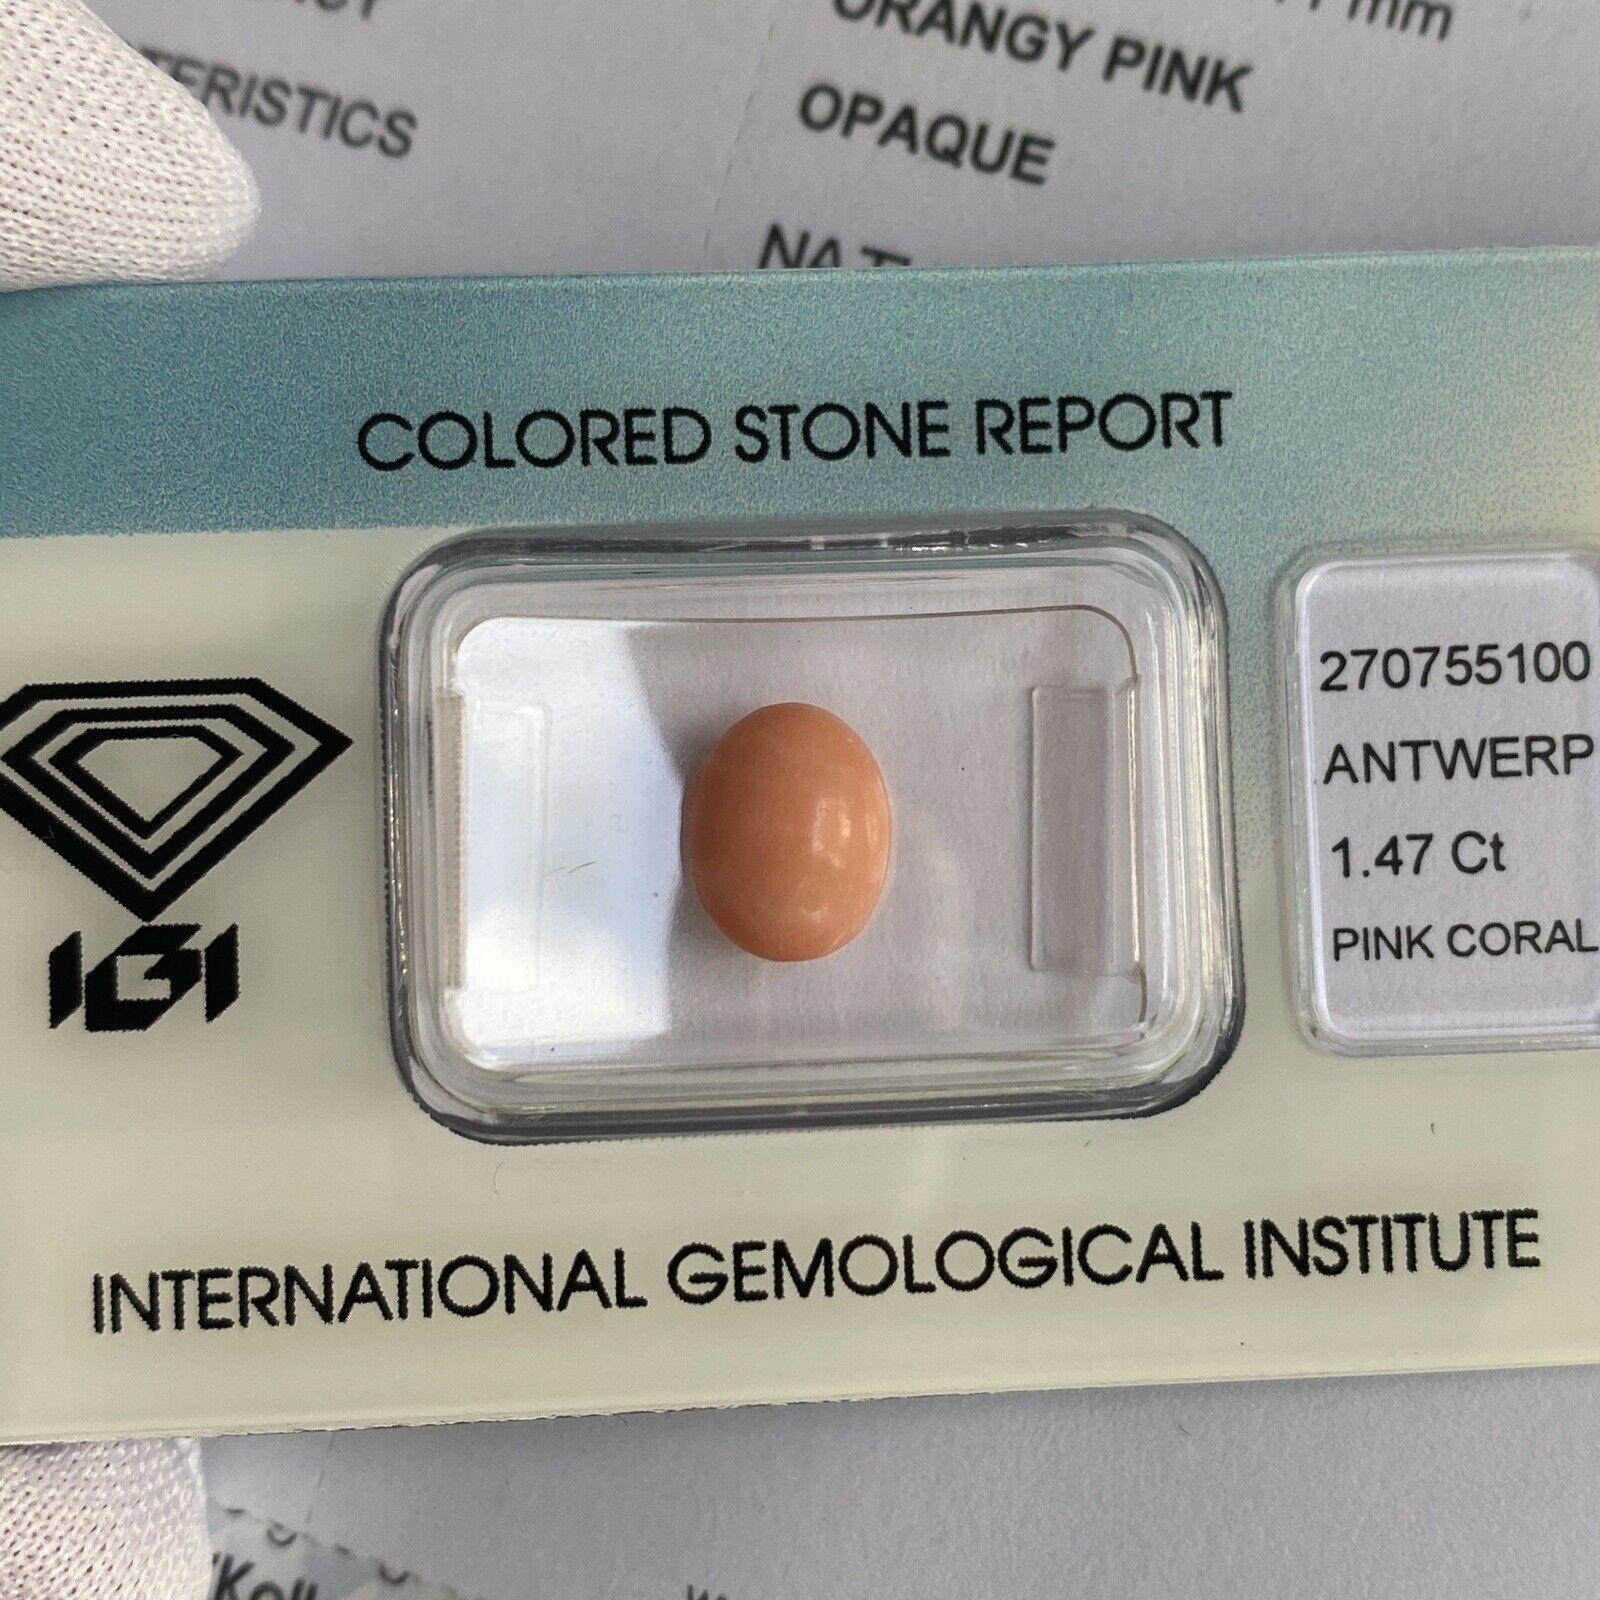 Rare Natural Orange Pink Untreated Coral 1.47ct Oval Cabochon IGI Certified

Natural Pink Orange Coral Gem. 
1.47 Carat with an excellent oval cabochon cut. 
This is a fine piece of natural, untreated coral with beautiful orange pink colour. 
Most